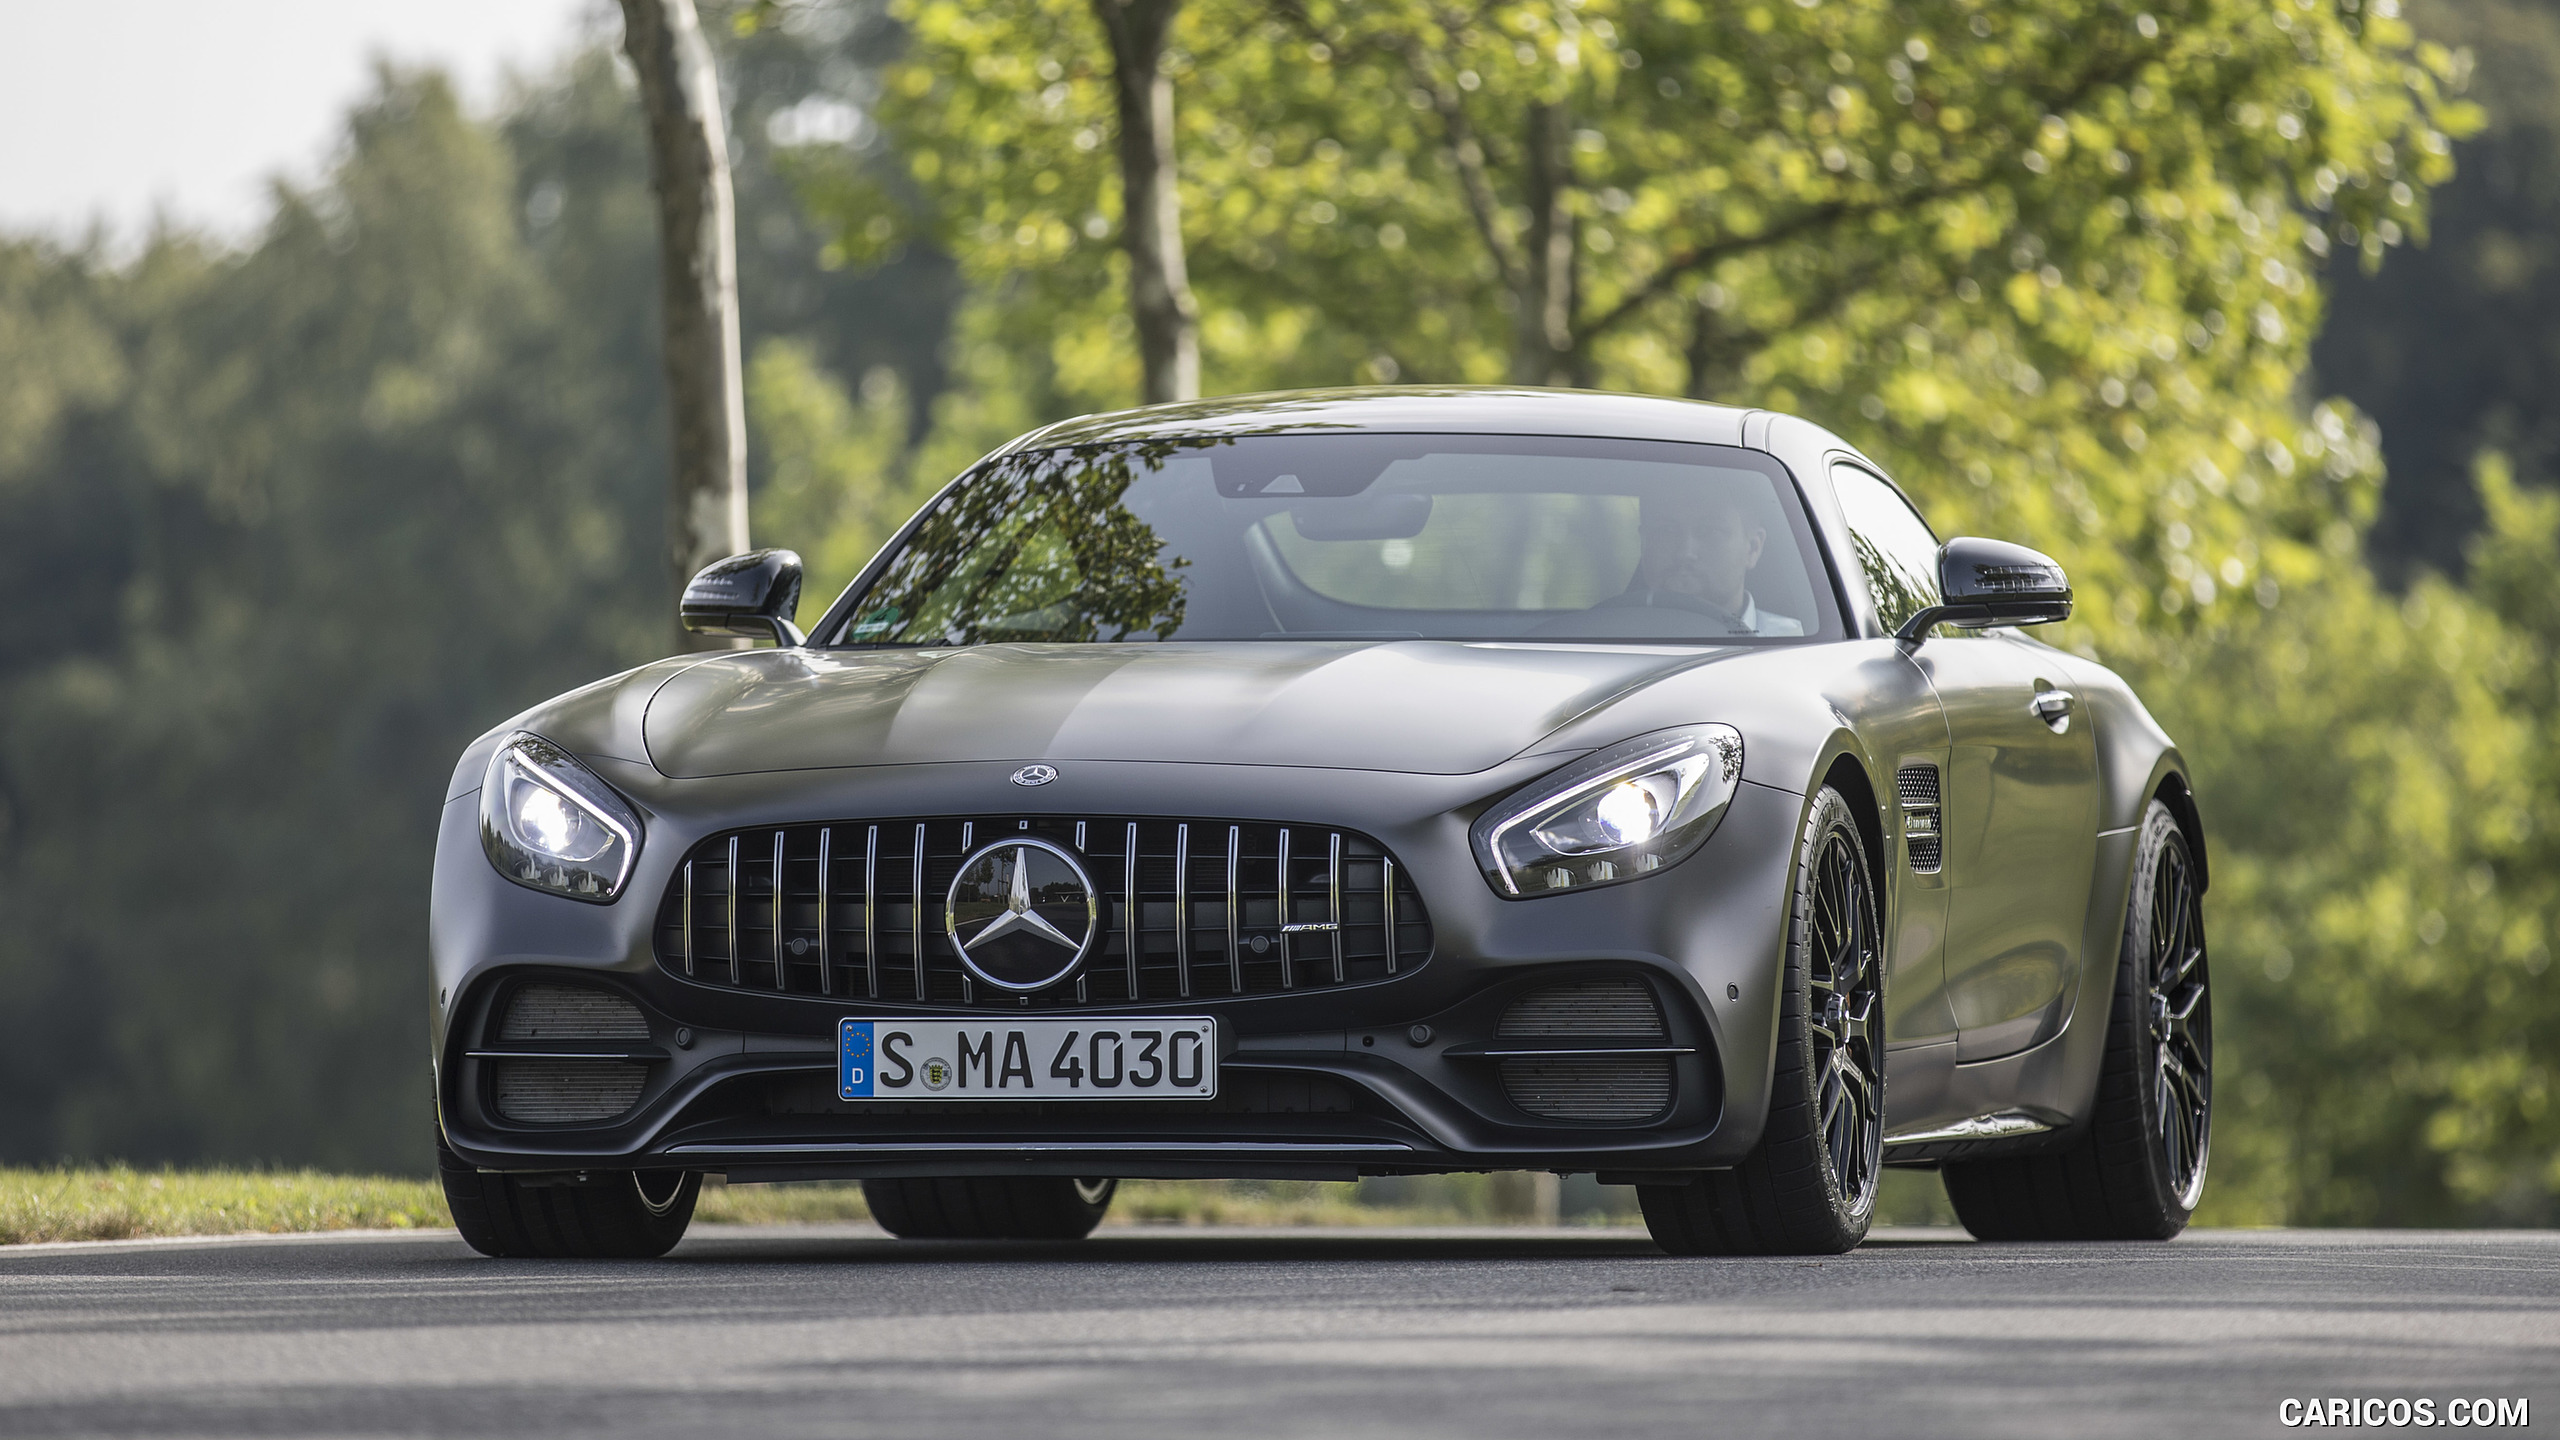 2018 Mercedes-AMG GT C Coupe Edition 50 - Front, #25 of 70